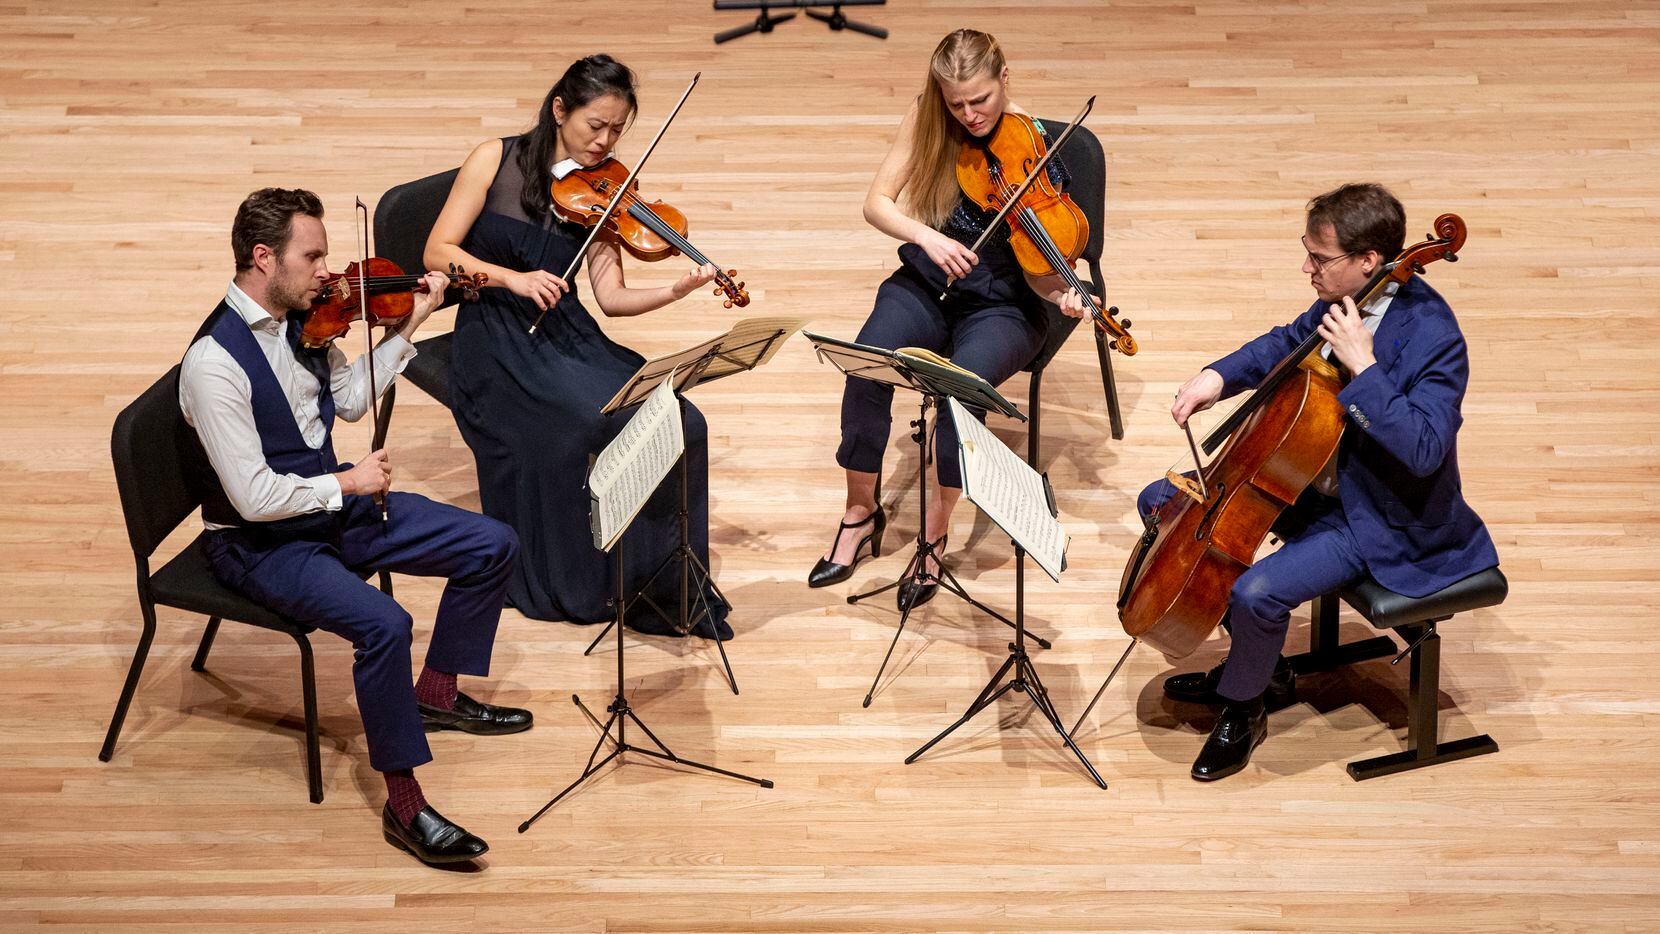 The finest chamber music concert in memory, from the Doric String Quartet in Dallas performance